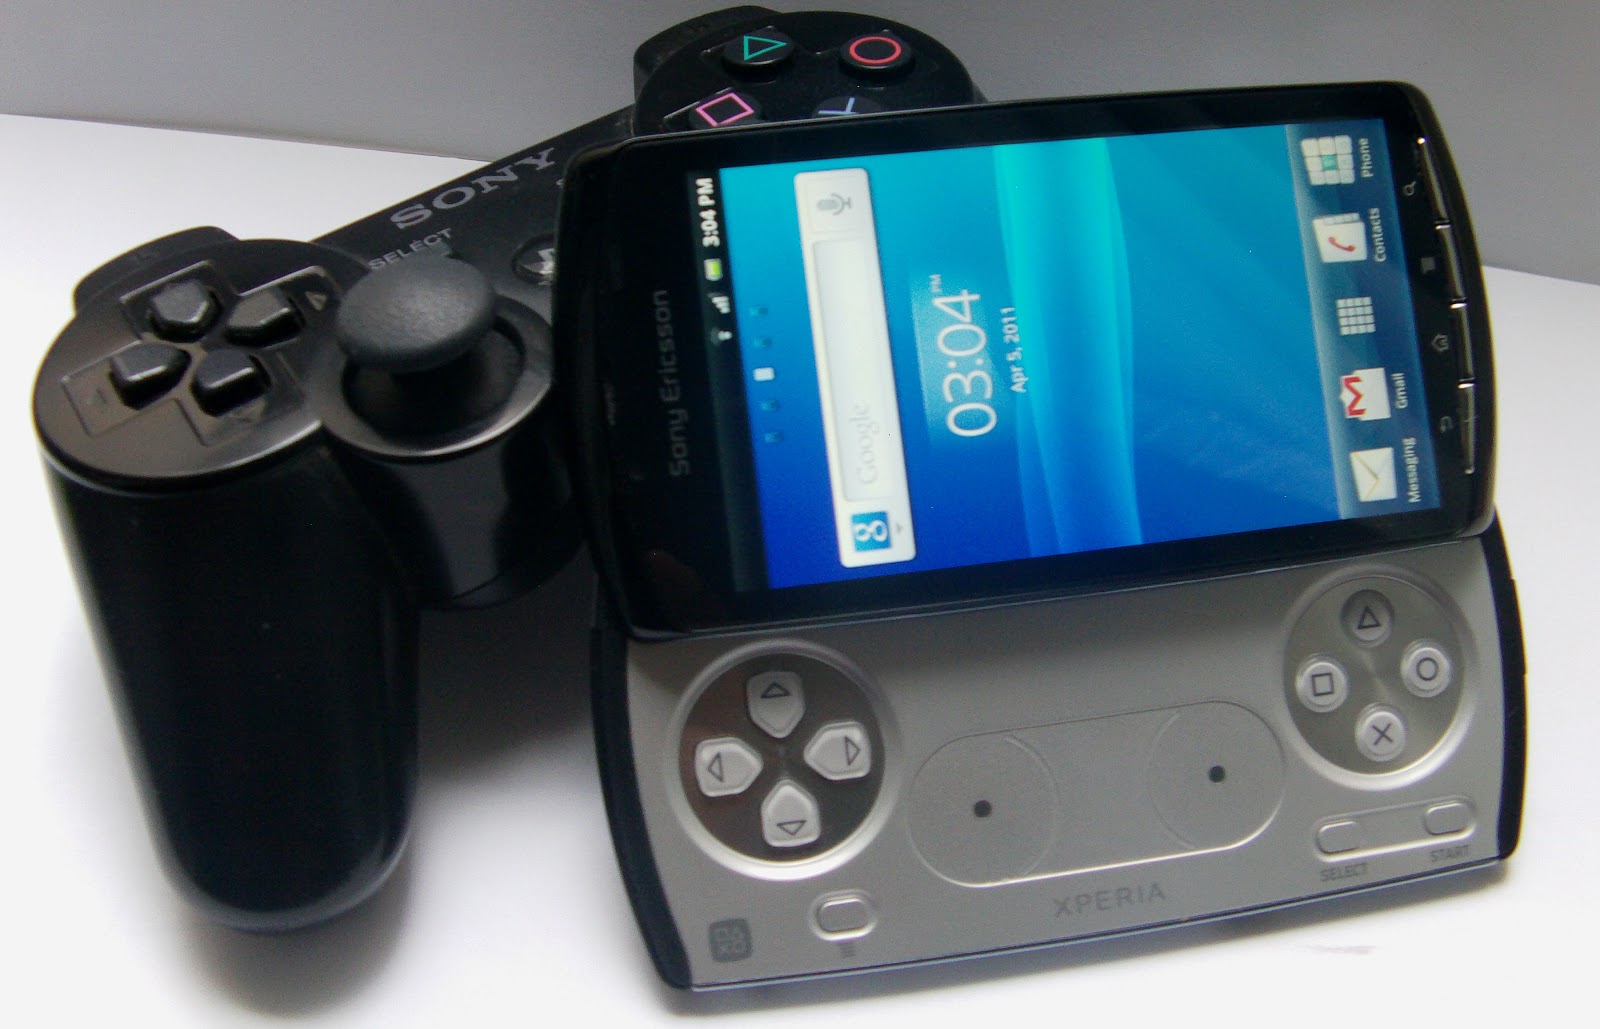 Imobile Phones SonyEricsson XPERIA Play [Features,Demo,Review]